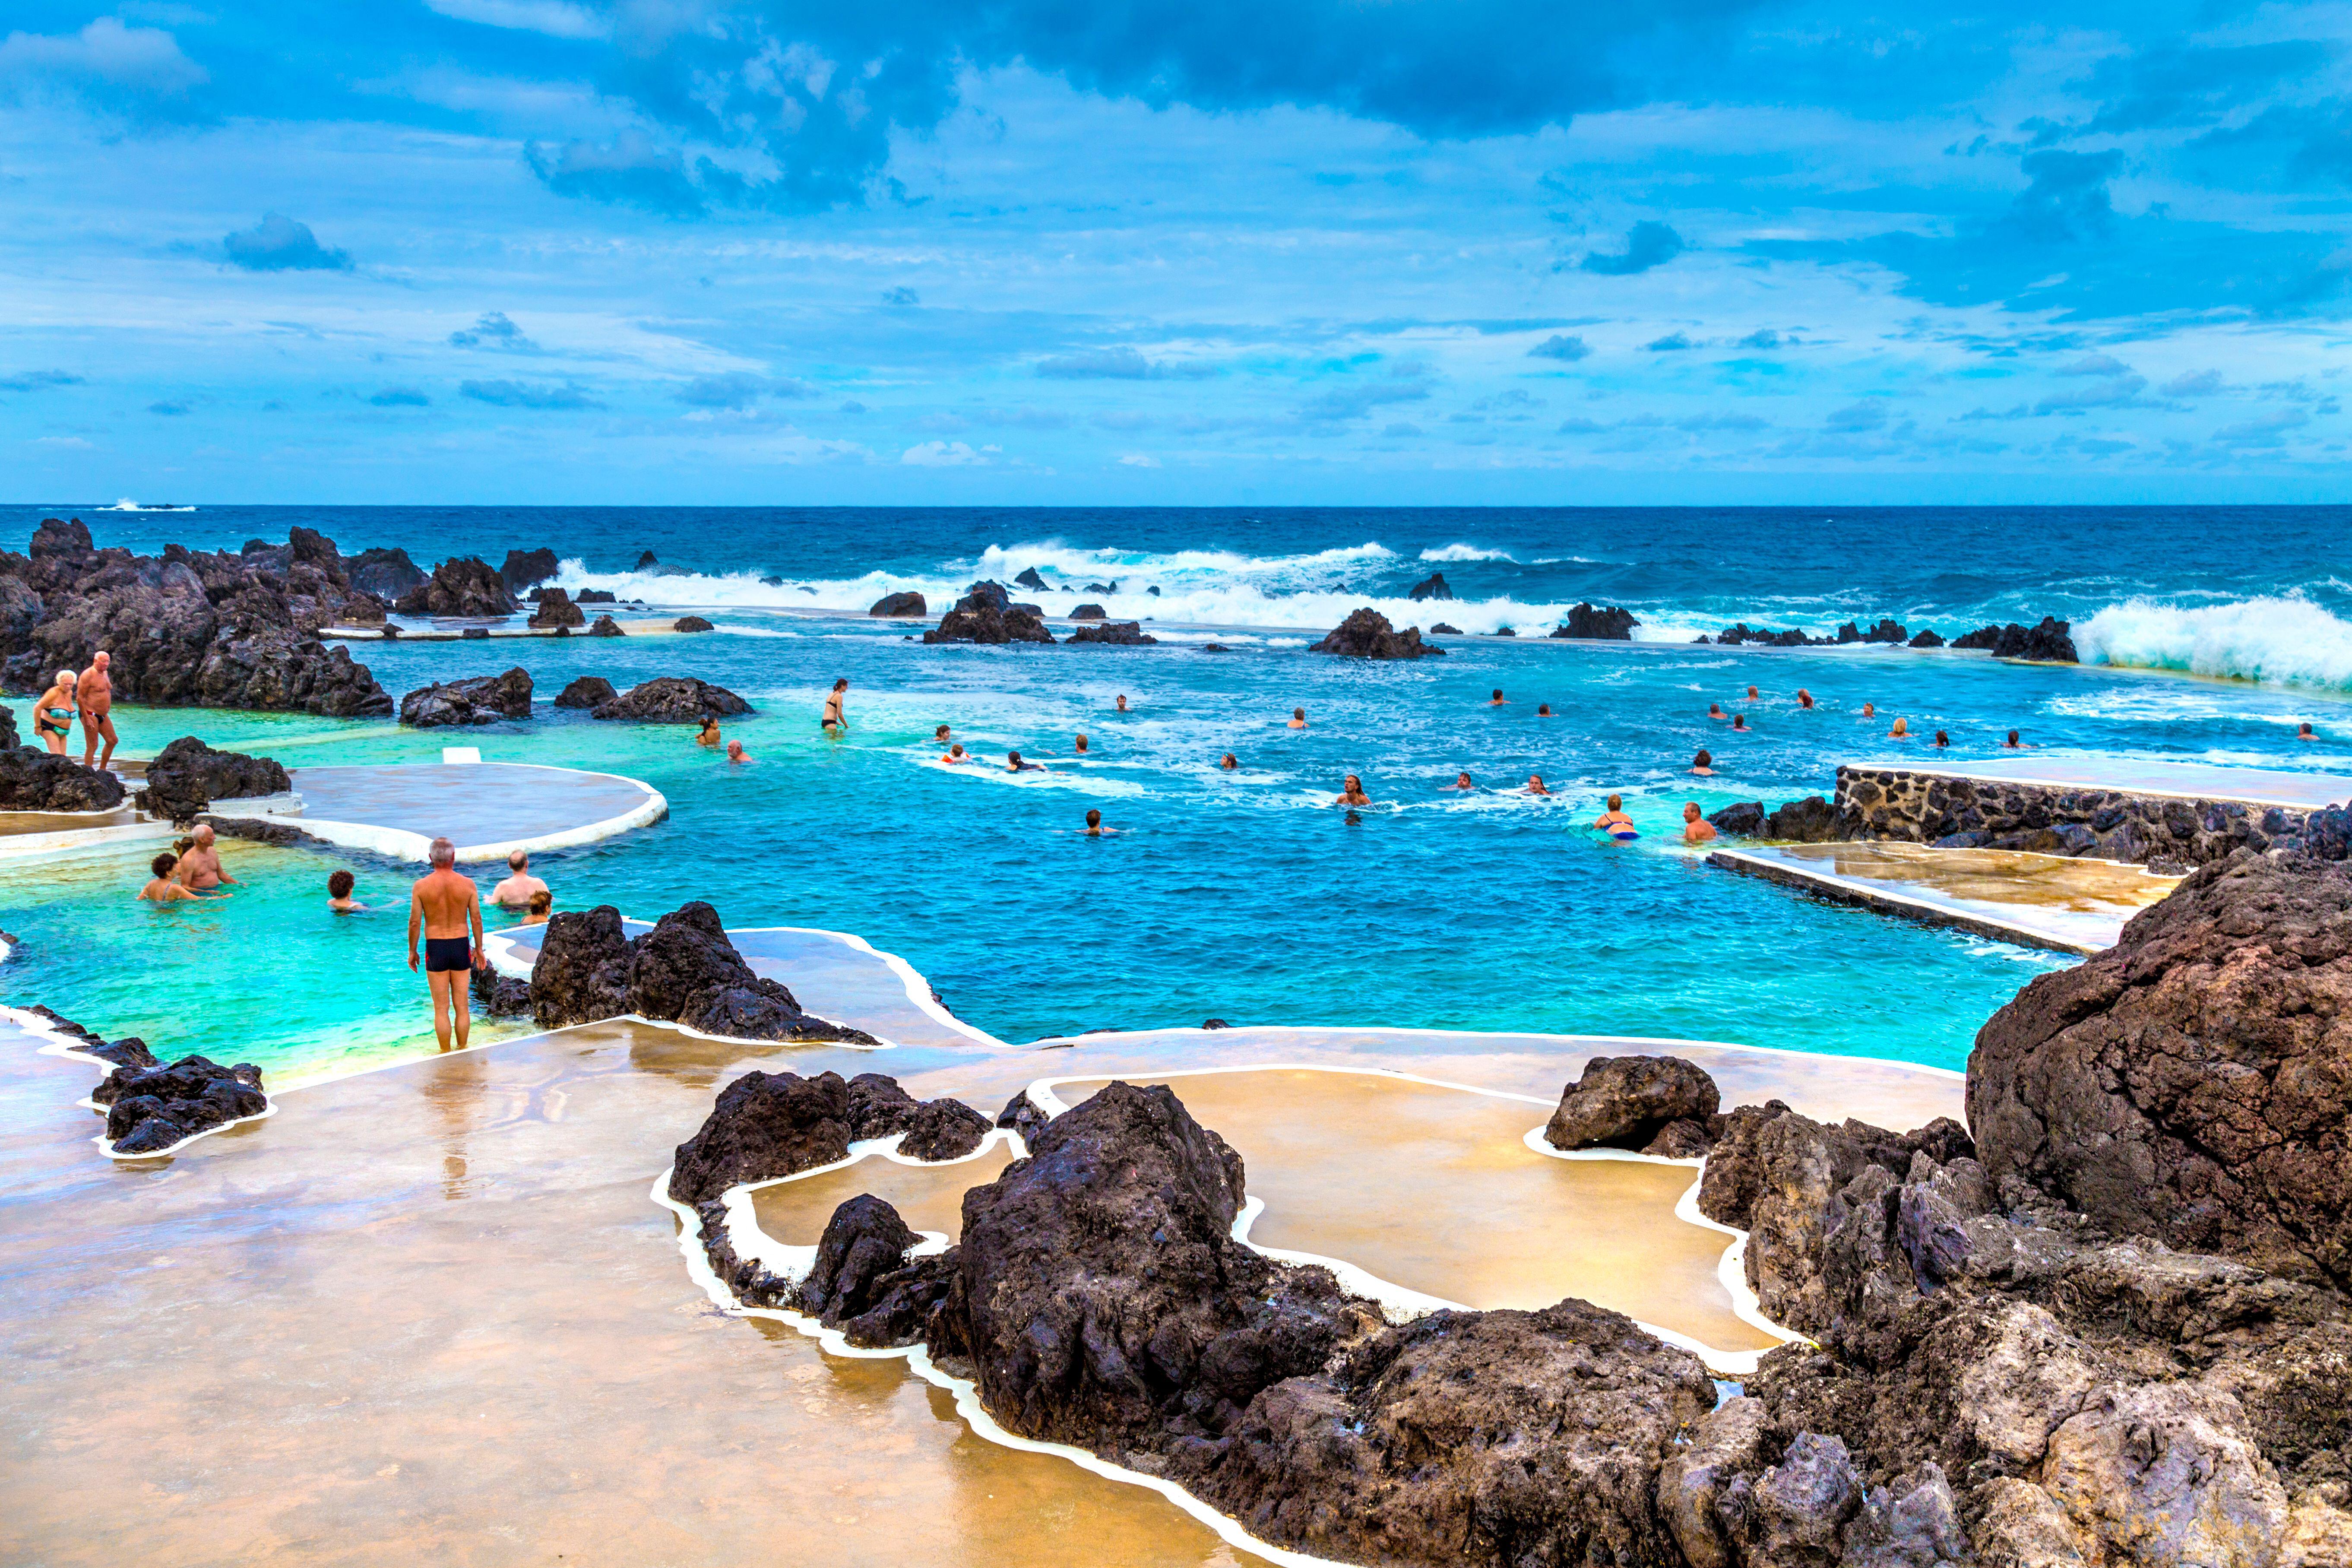 The natural pools of Porto Moniz were formed by a volcano